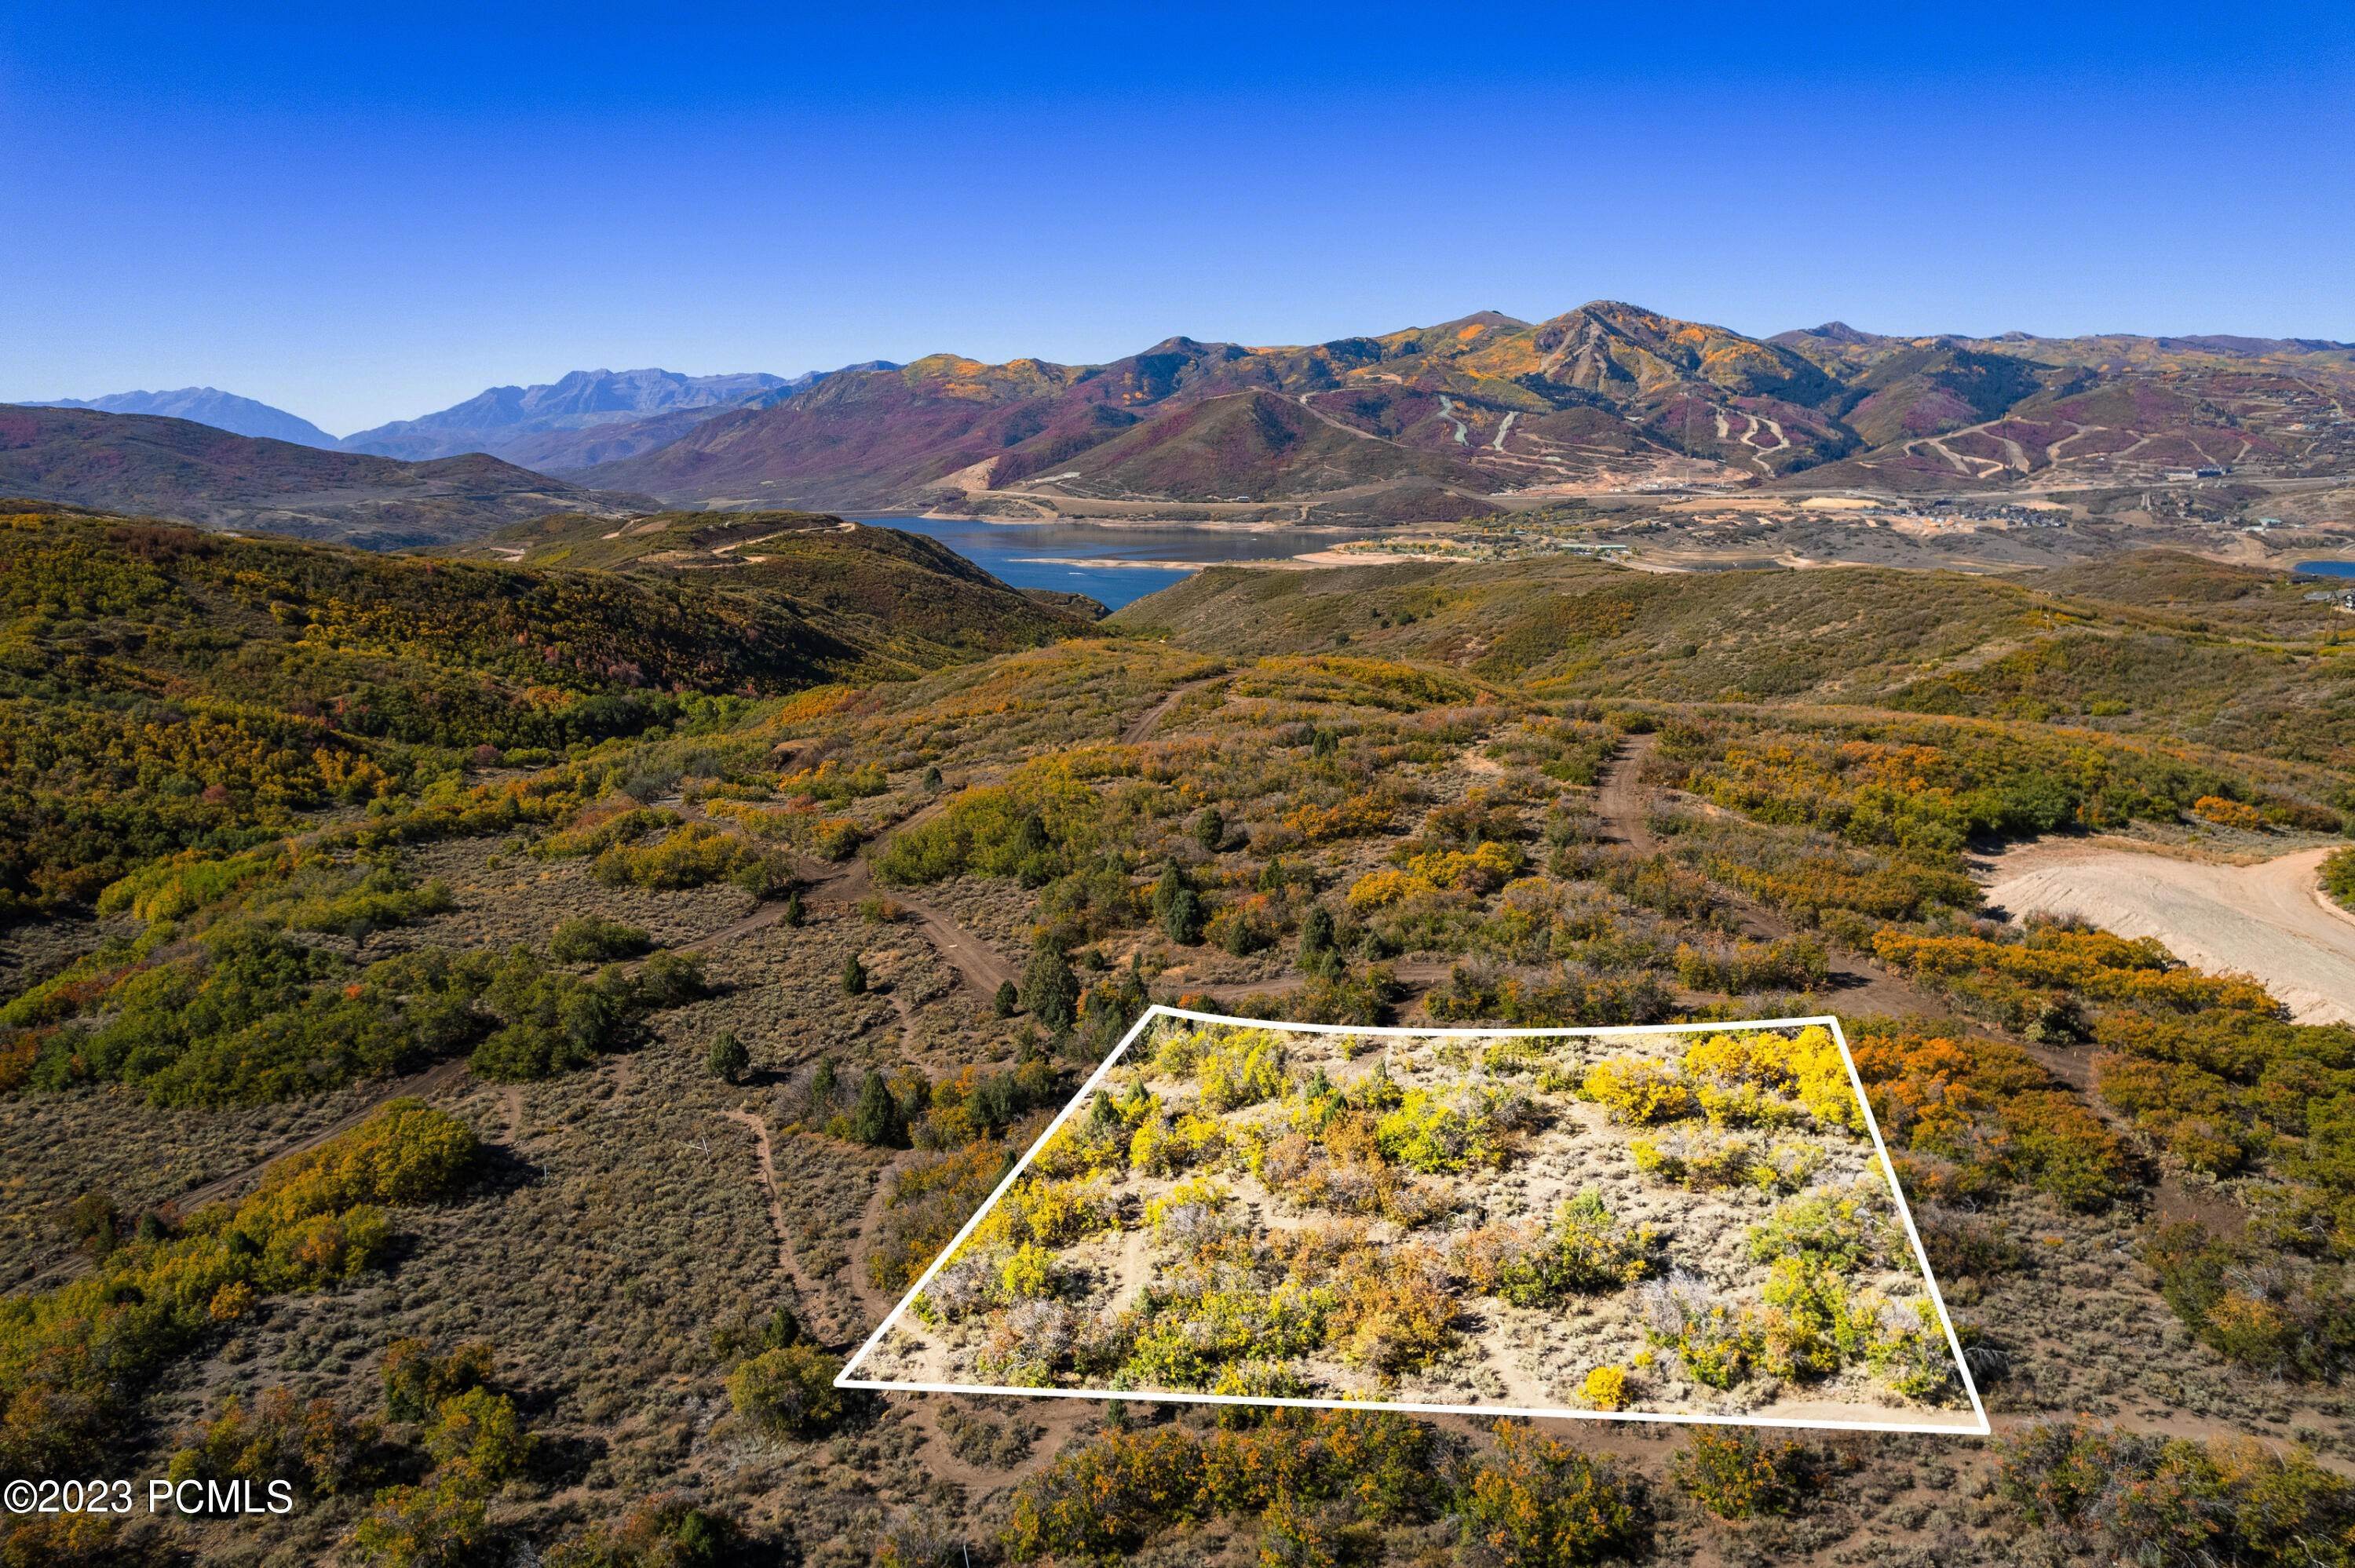 Residential Lots & Land for Sale at 10124 Painted Bluff Place Kamas, Utah 84036 United States